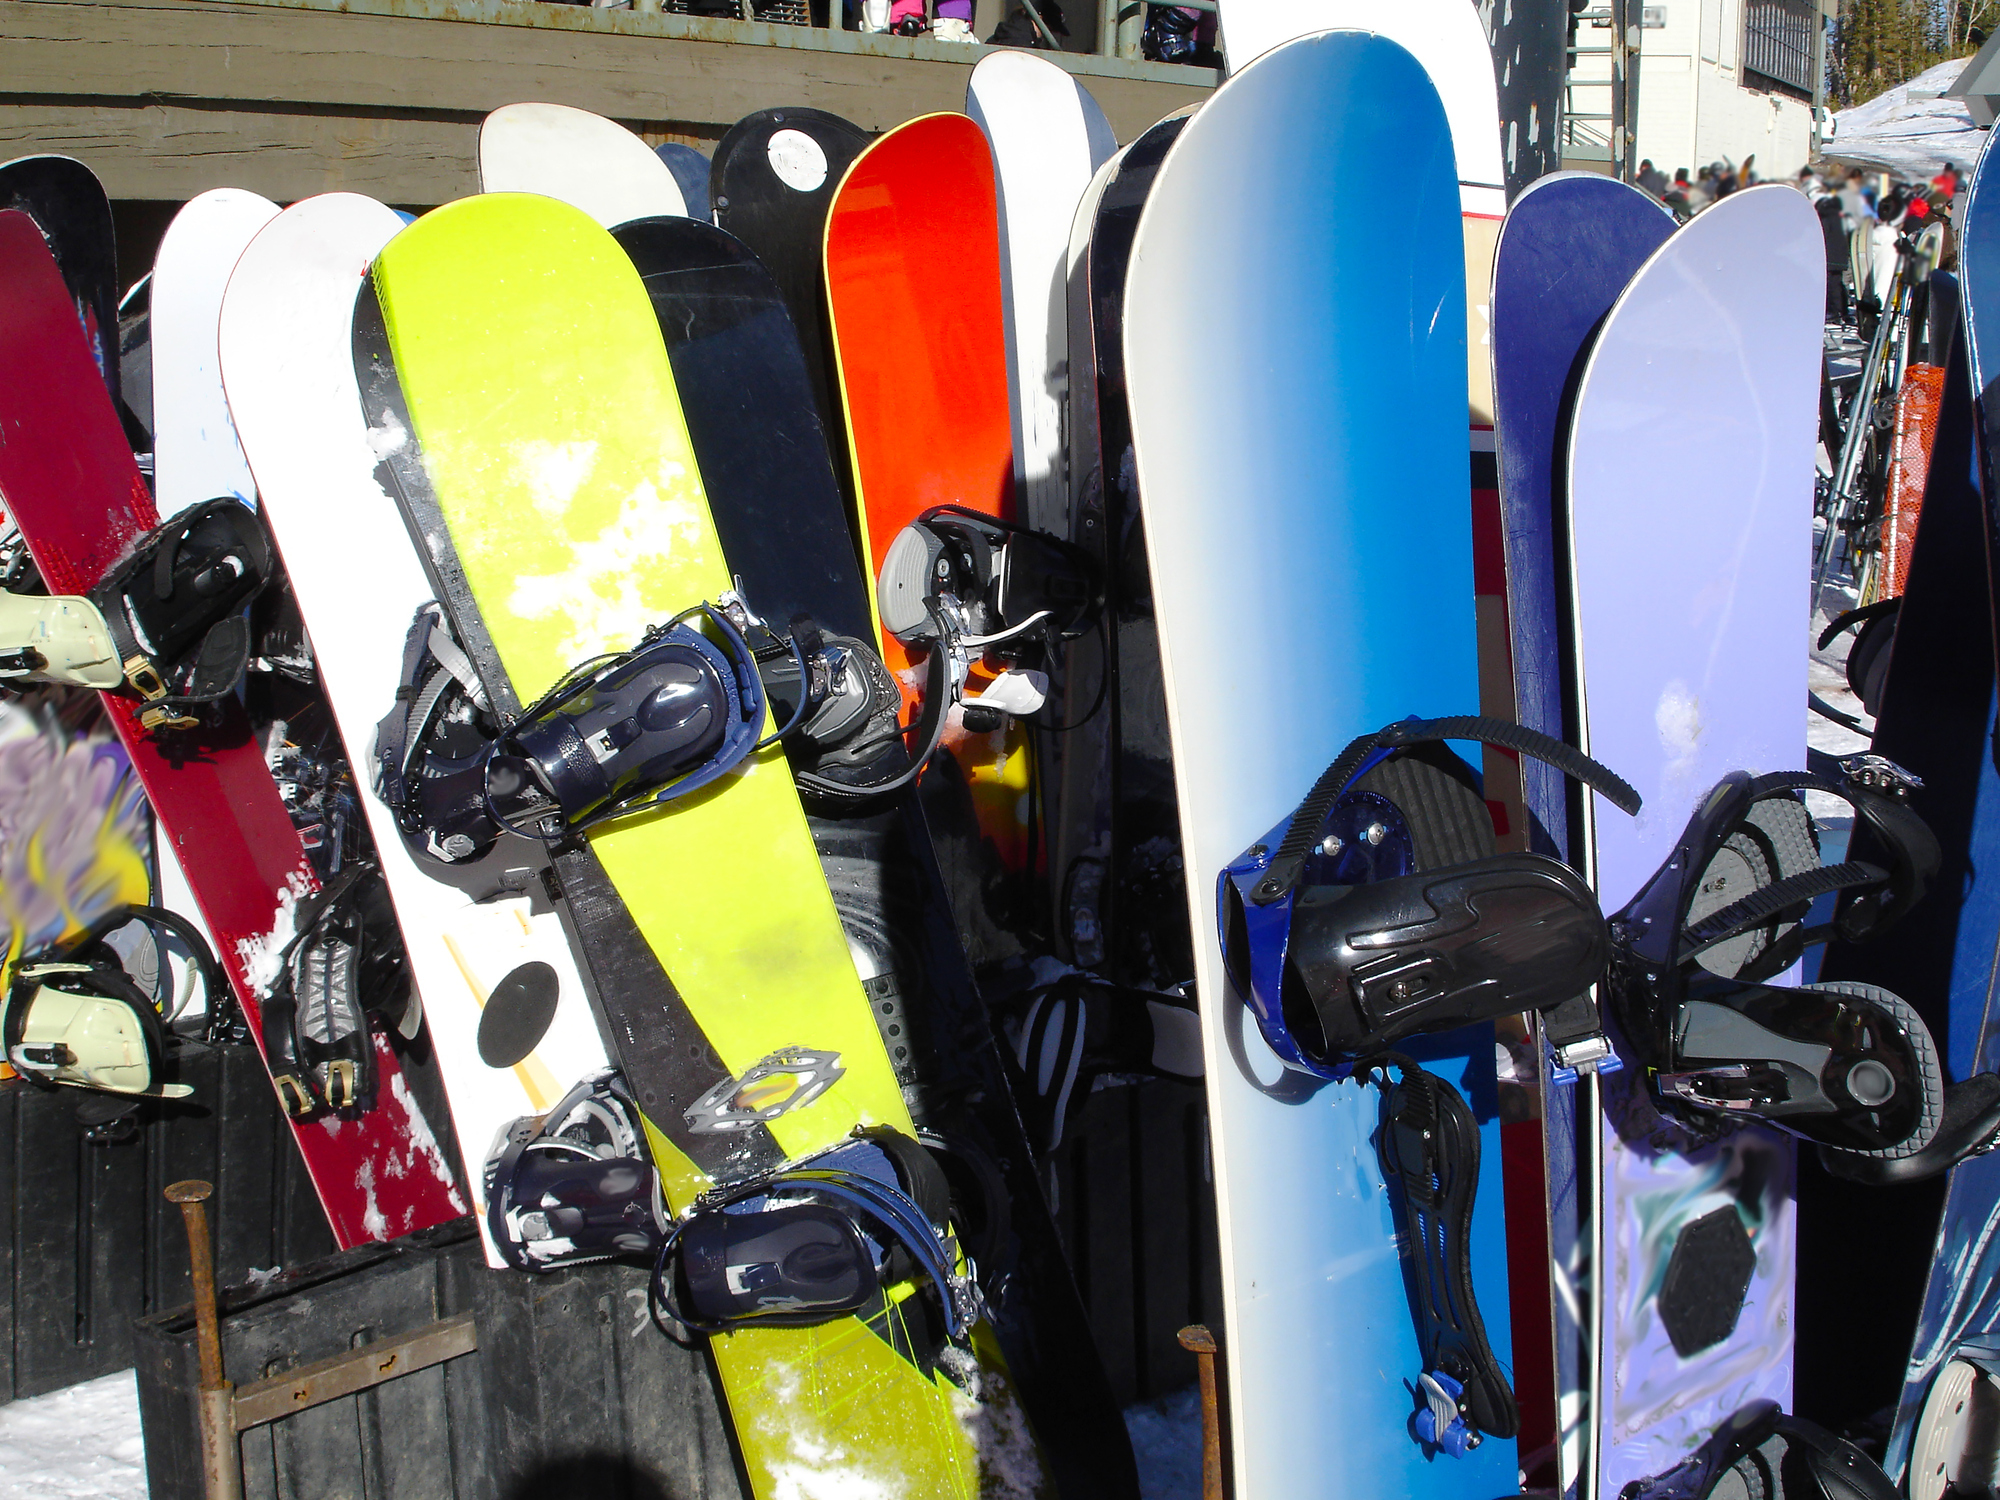 How to start skiing or snowboarding without breaking the bank